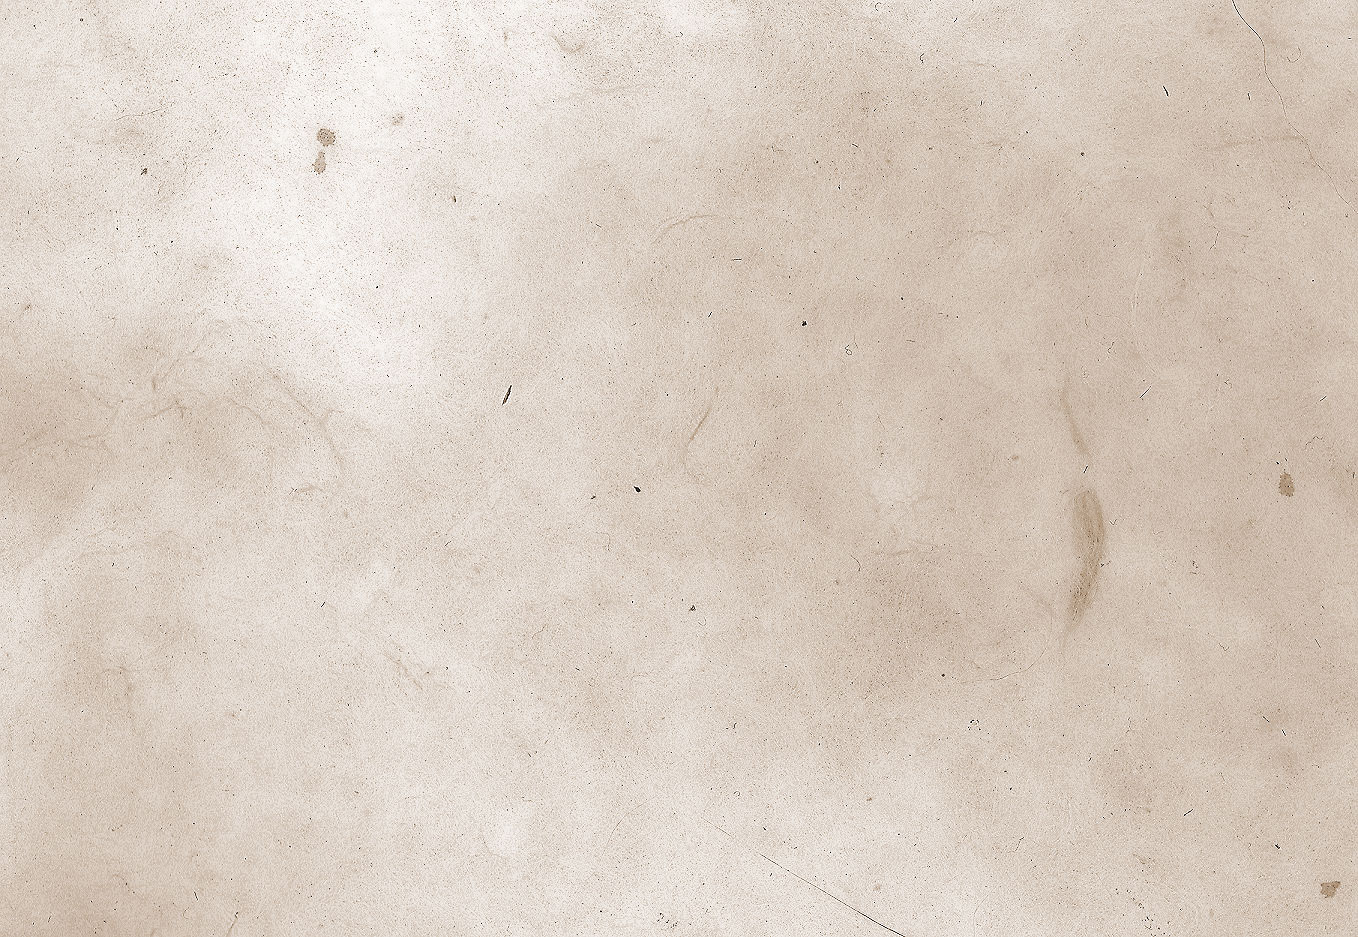 texture paper, paper texture, old battered paper, download photo, image, background, background